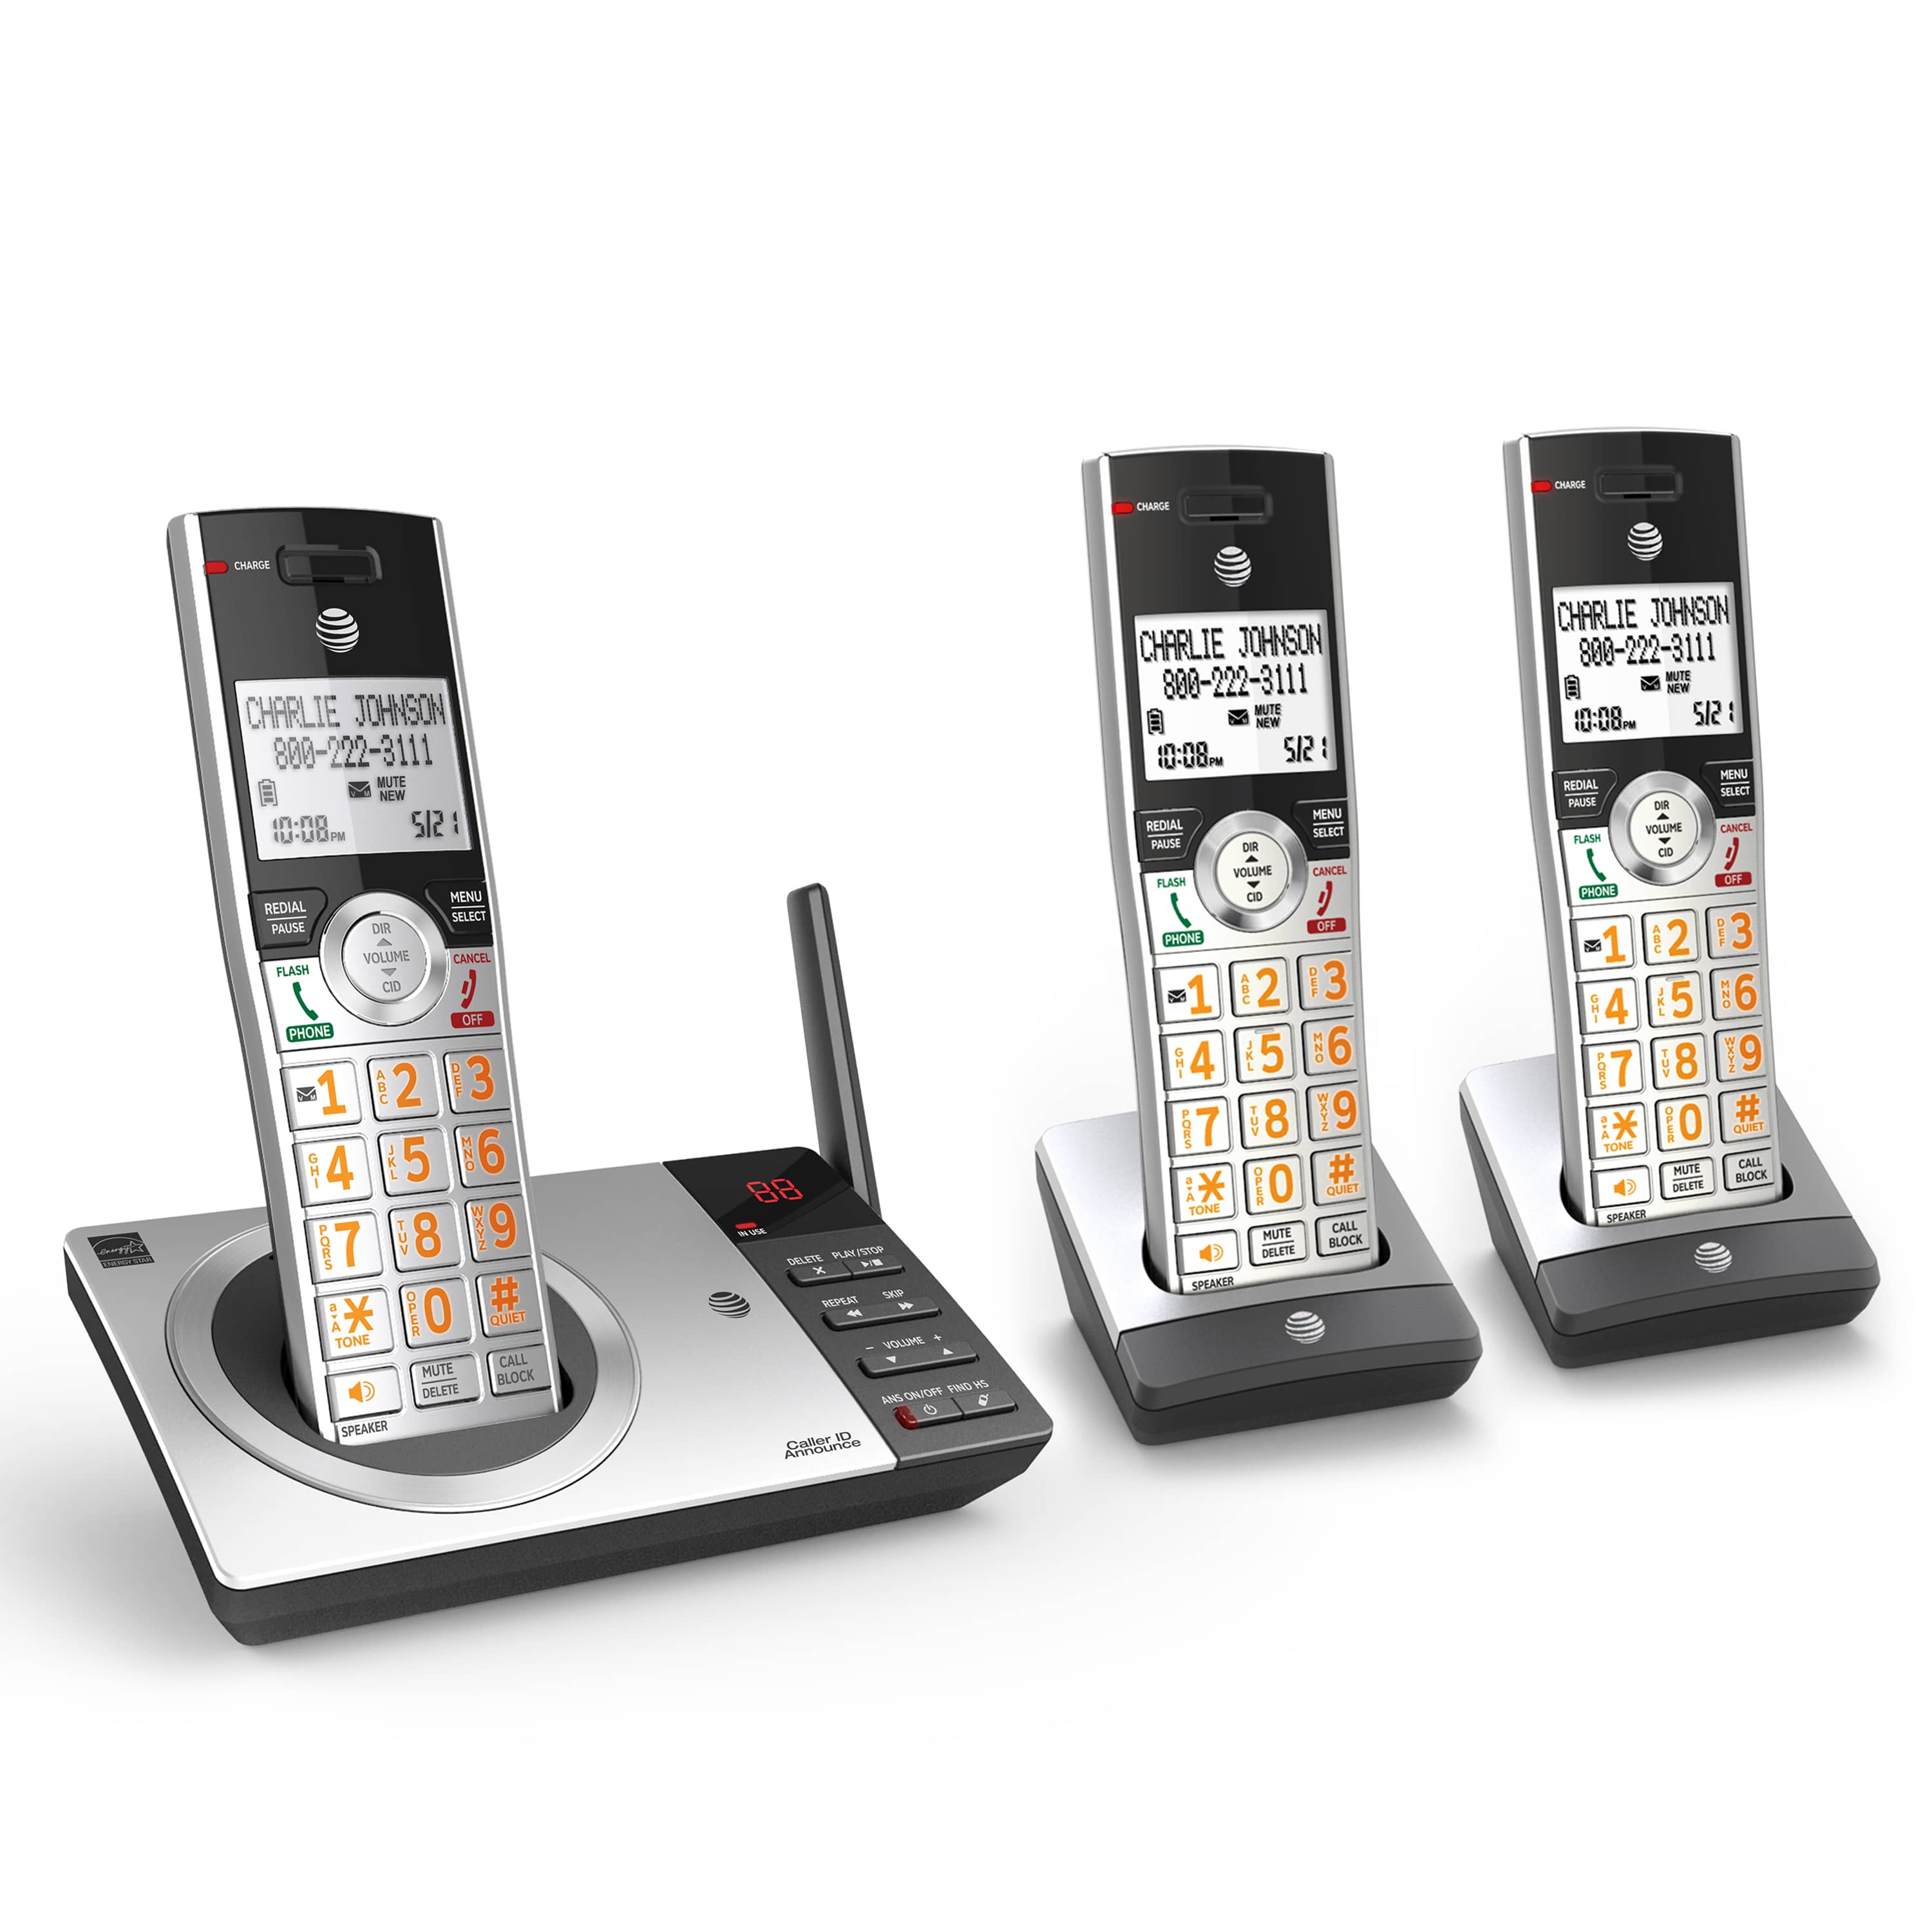 4 handset phone system with smart call blocker - view 3